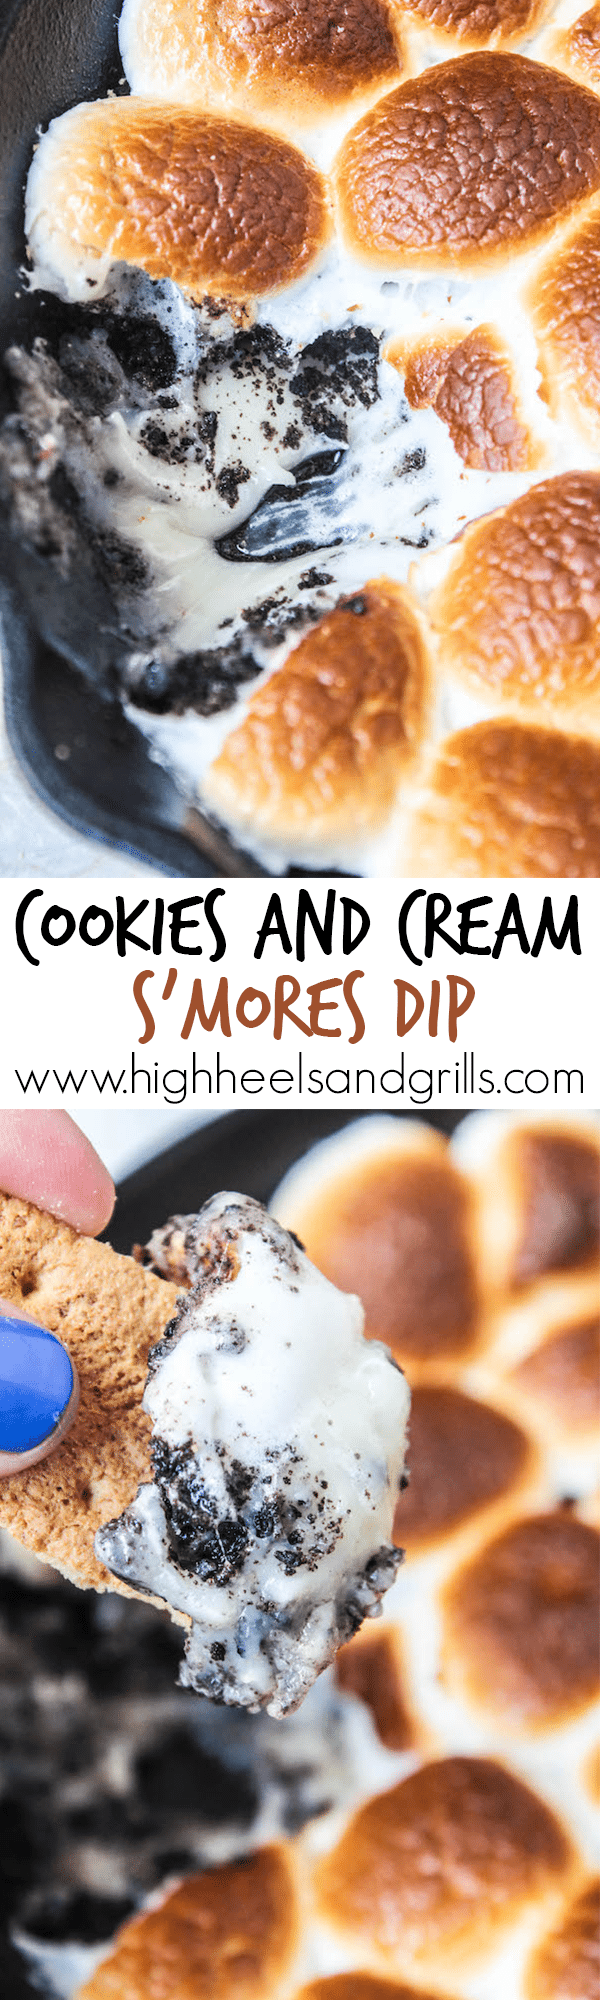 Cookies and Cream S'mores Dip - White chocolate chips, crushed oreos, and toasted marshmallows. Dip with graham crackers to fully enjoy this amazing dessert!